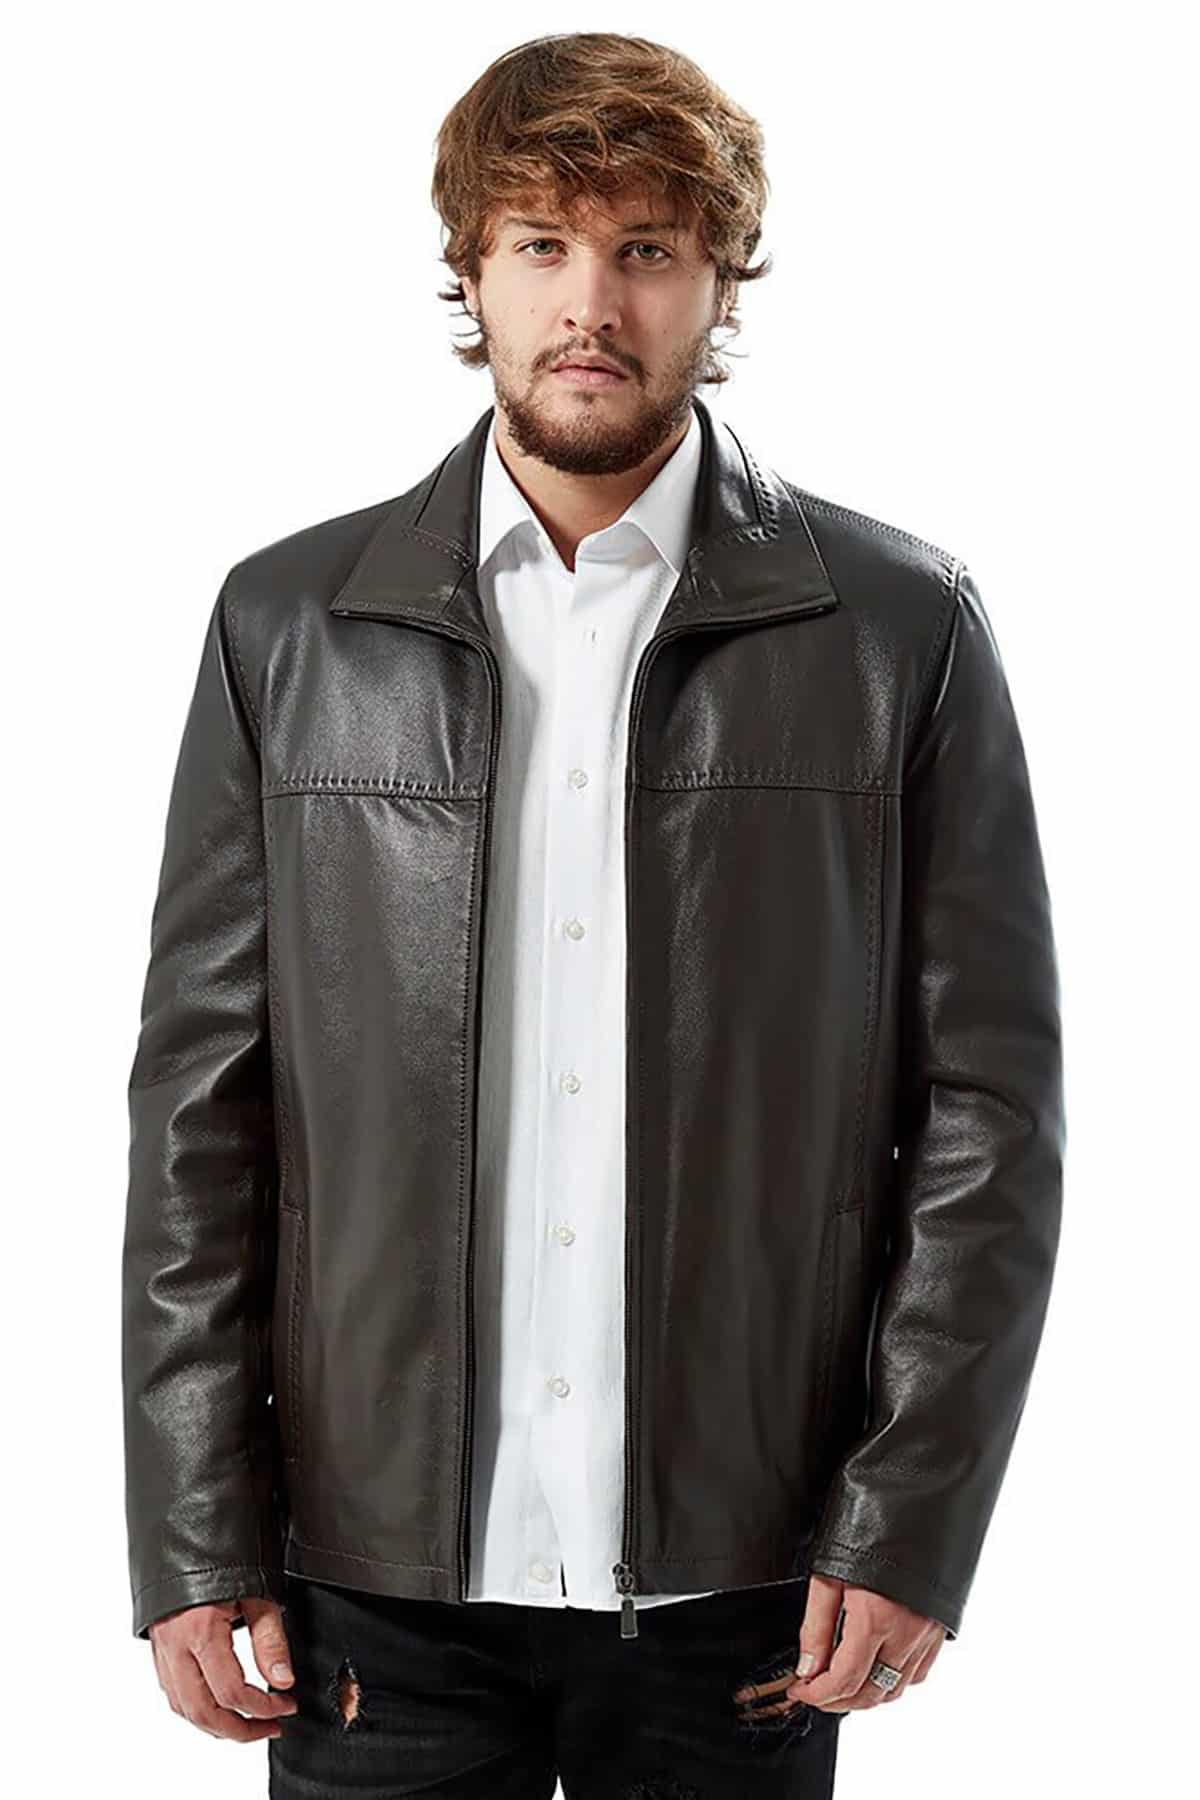 Bold Stiched Men’s Brown Leather Coat4